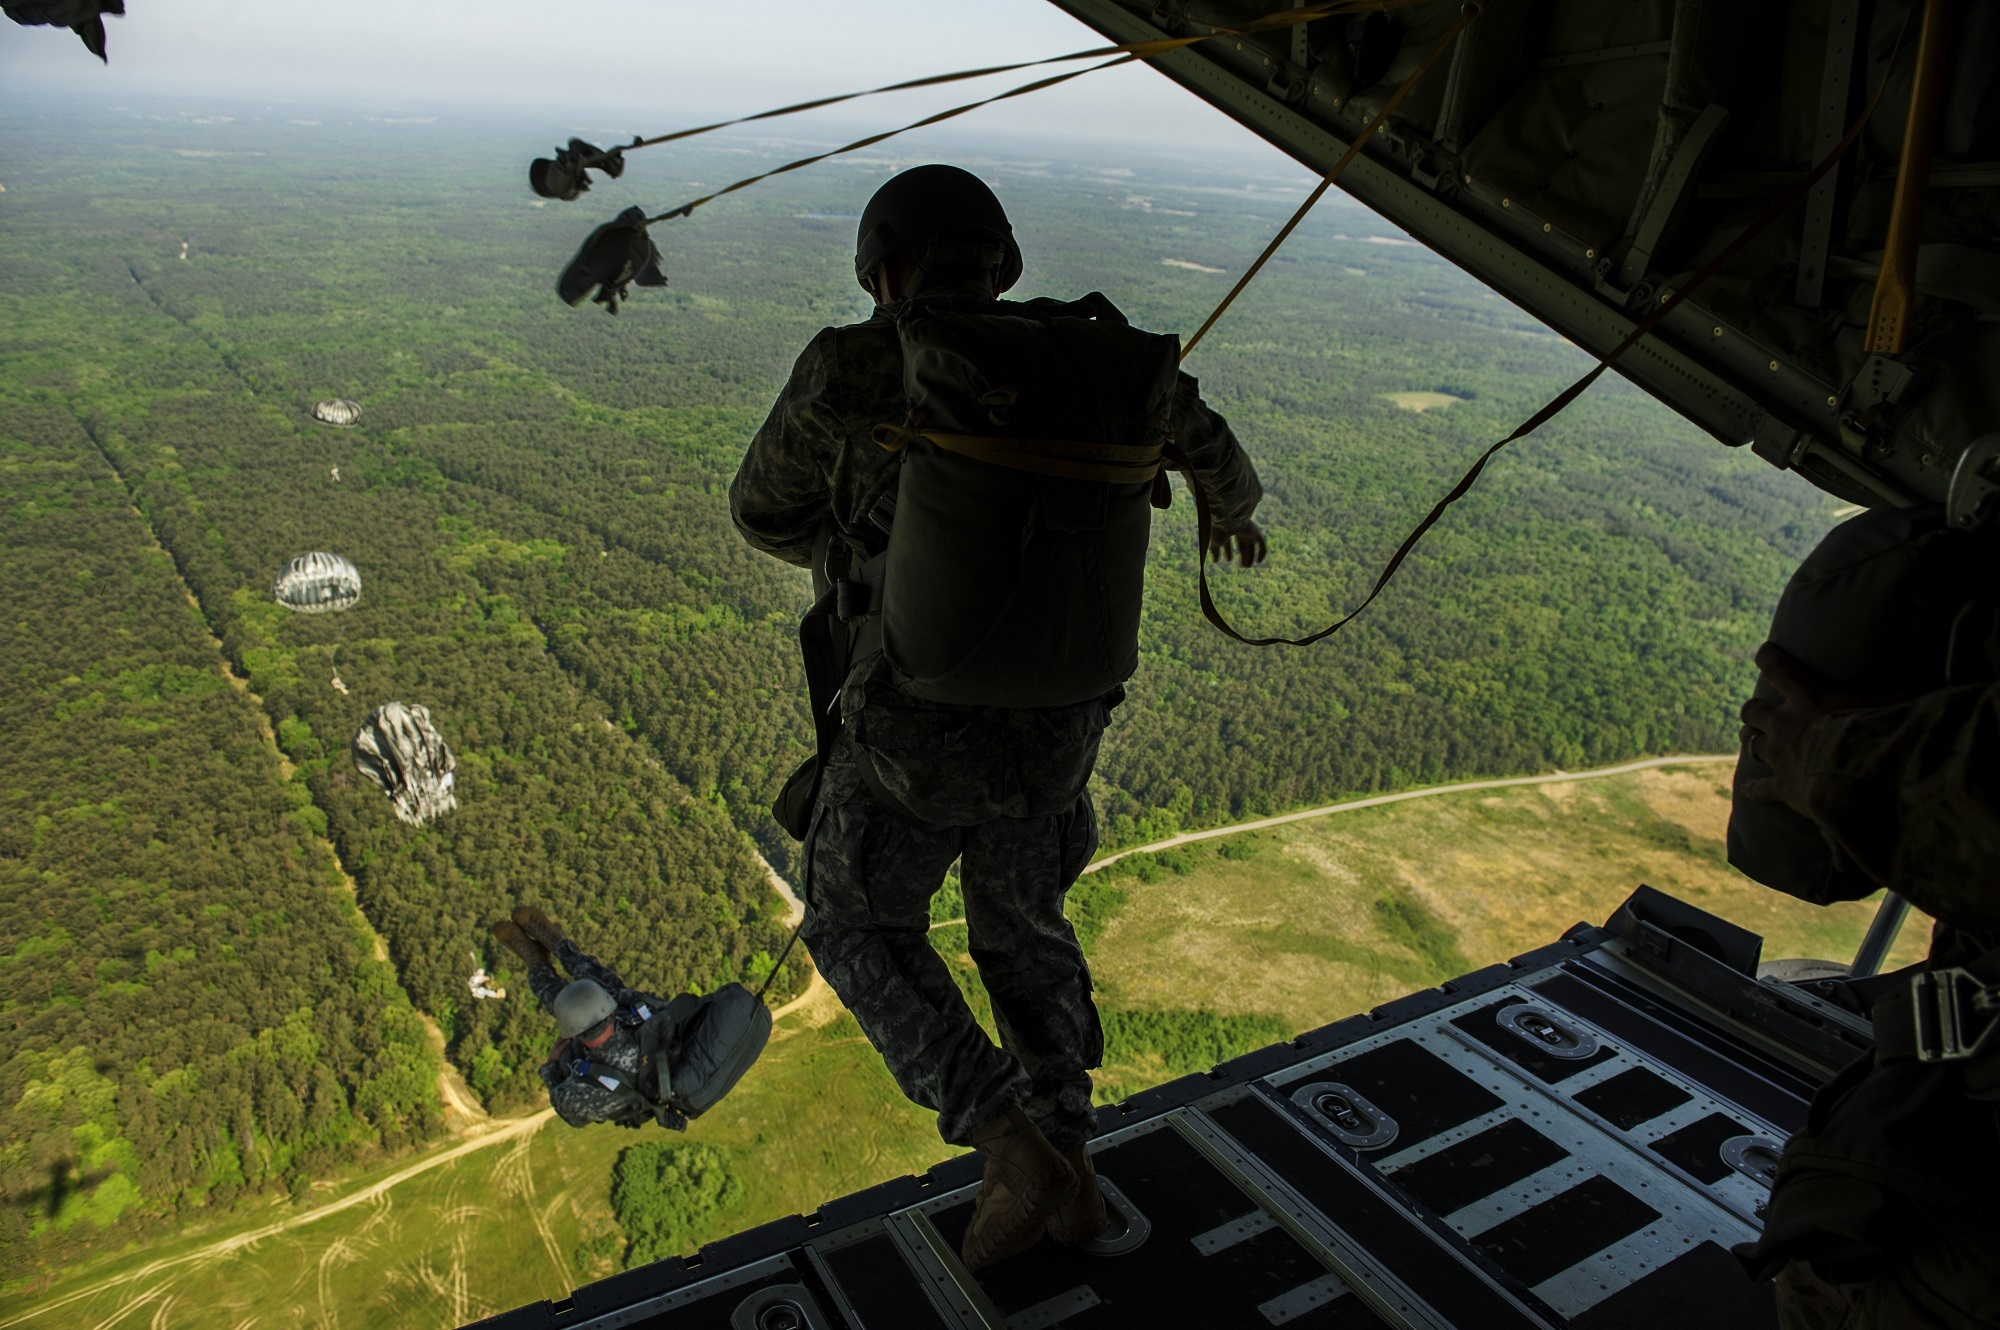 paratrooper, military, air force, aircraft, parachuting, soldier